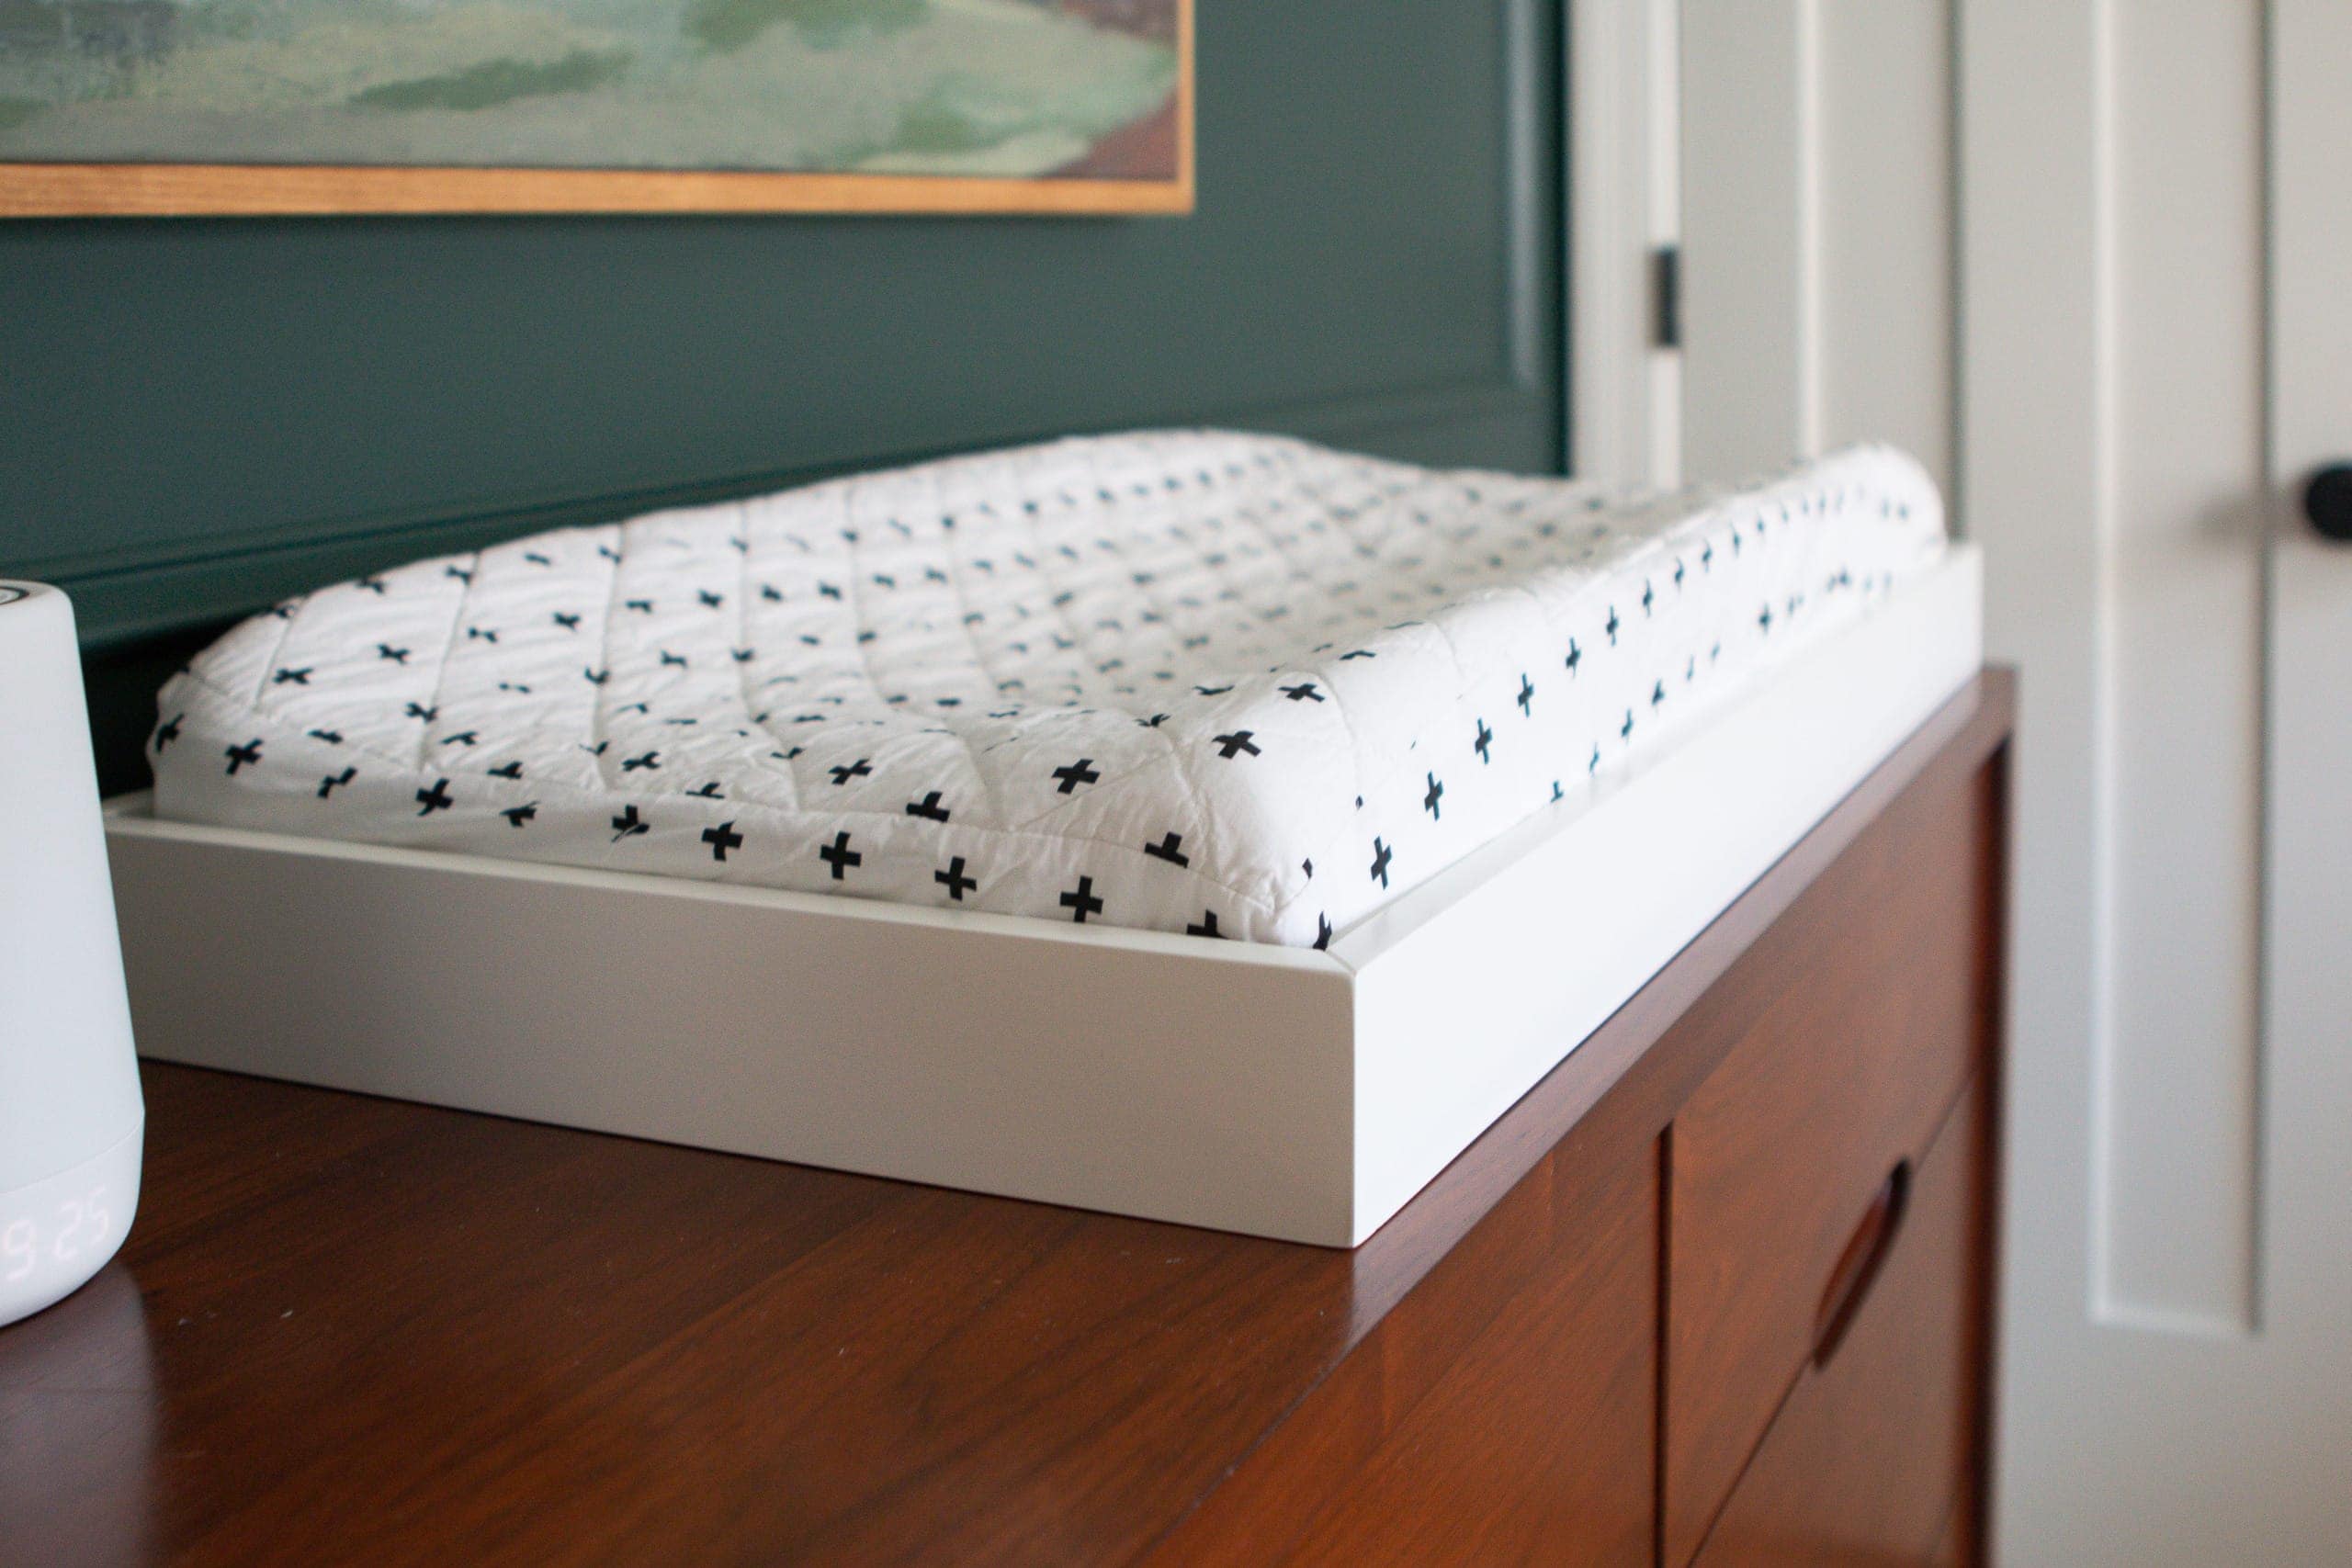 How to attach a changing pad to a dresser